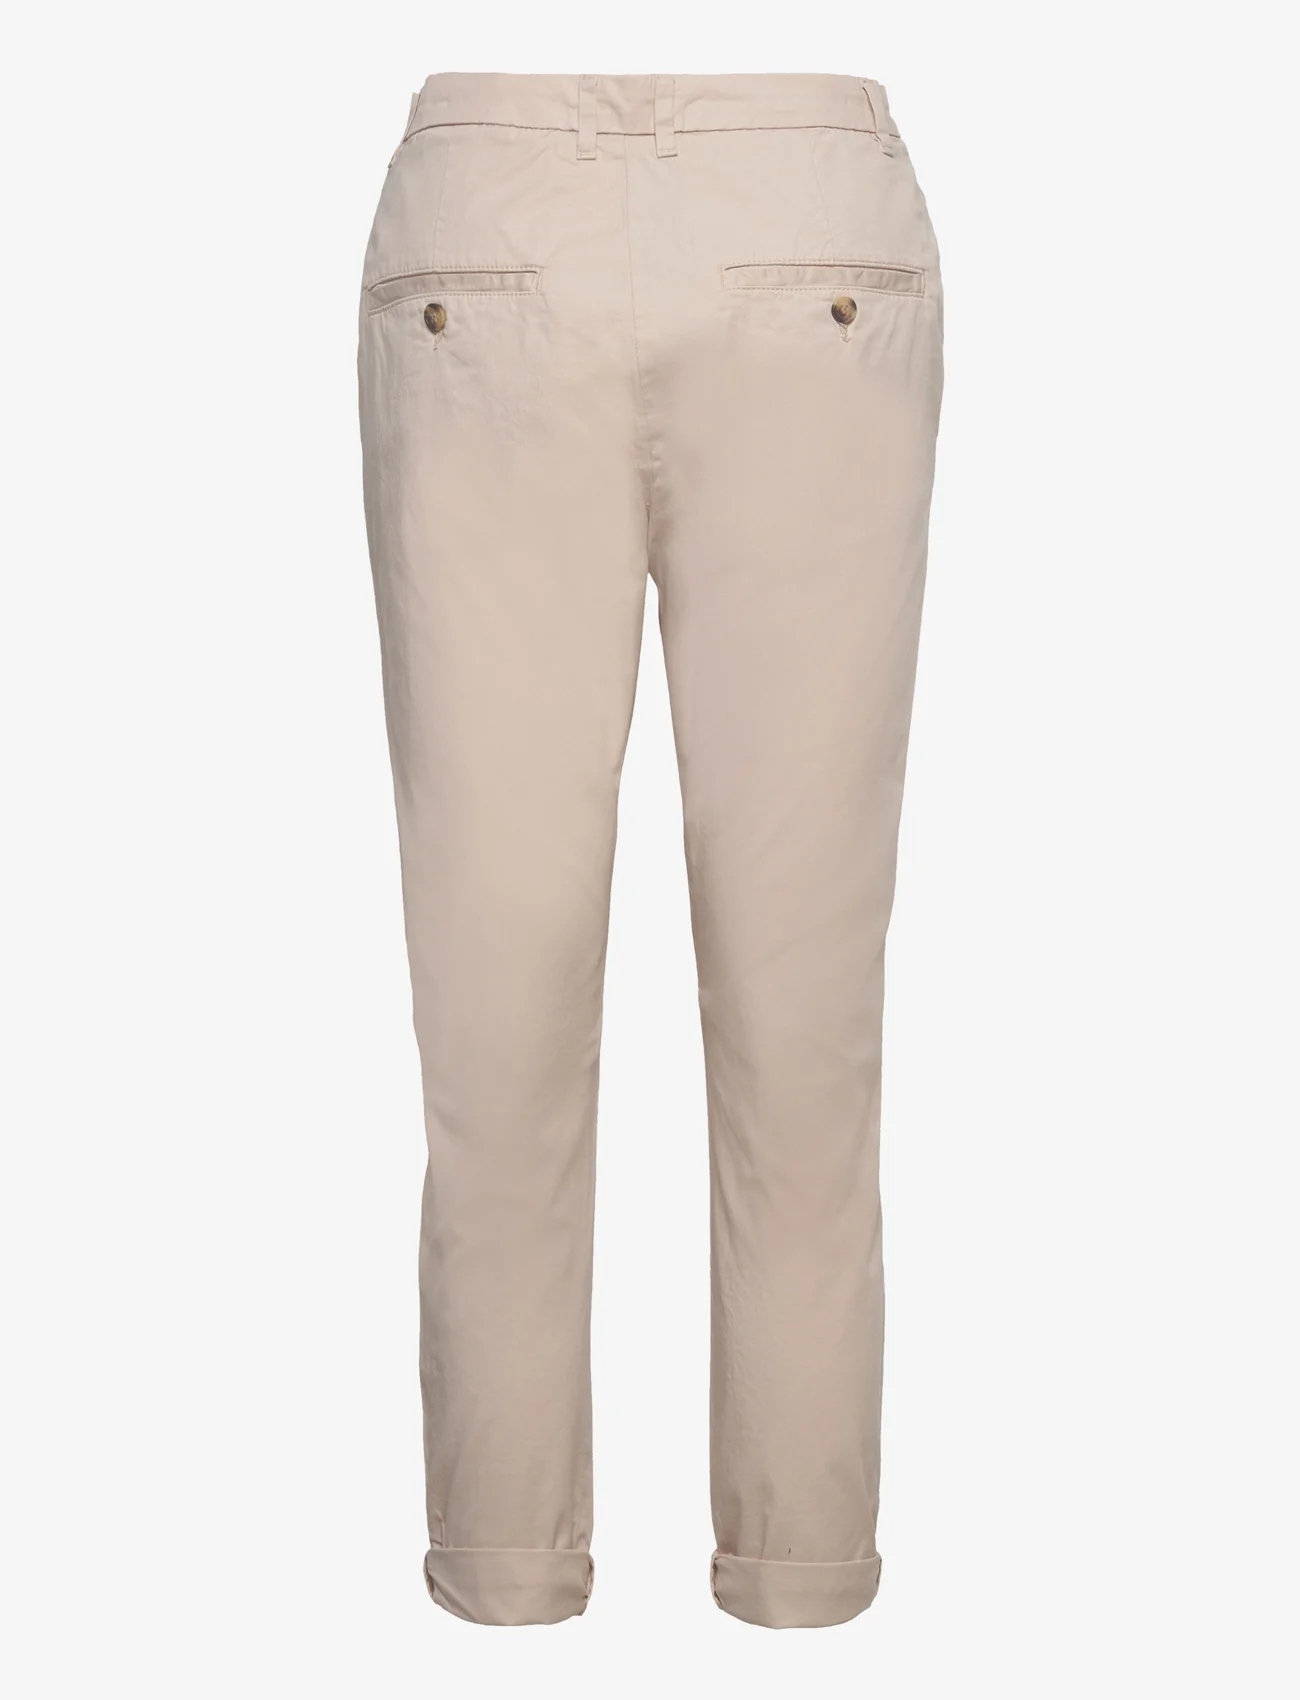 Hope - Tapered-leg Stretch Chinos - chinos - ligth beige - 1